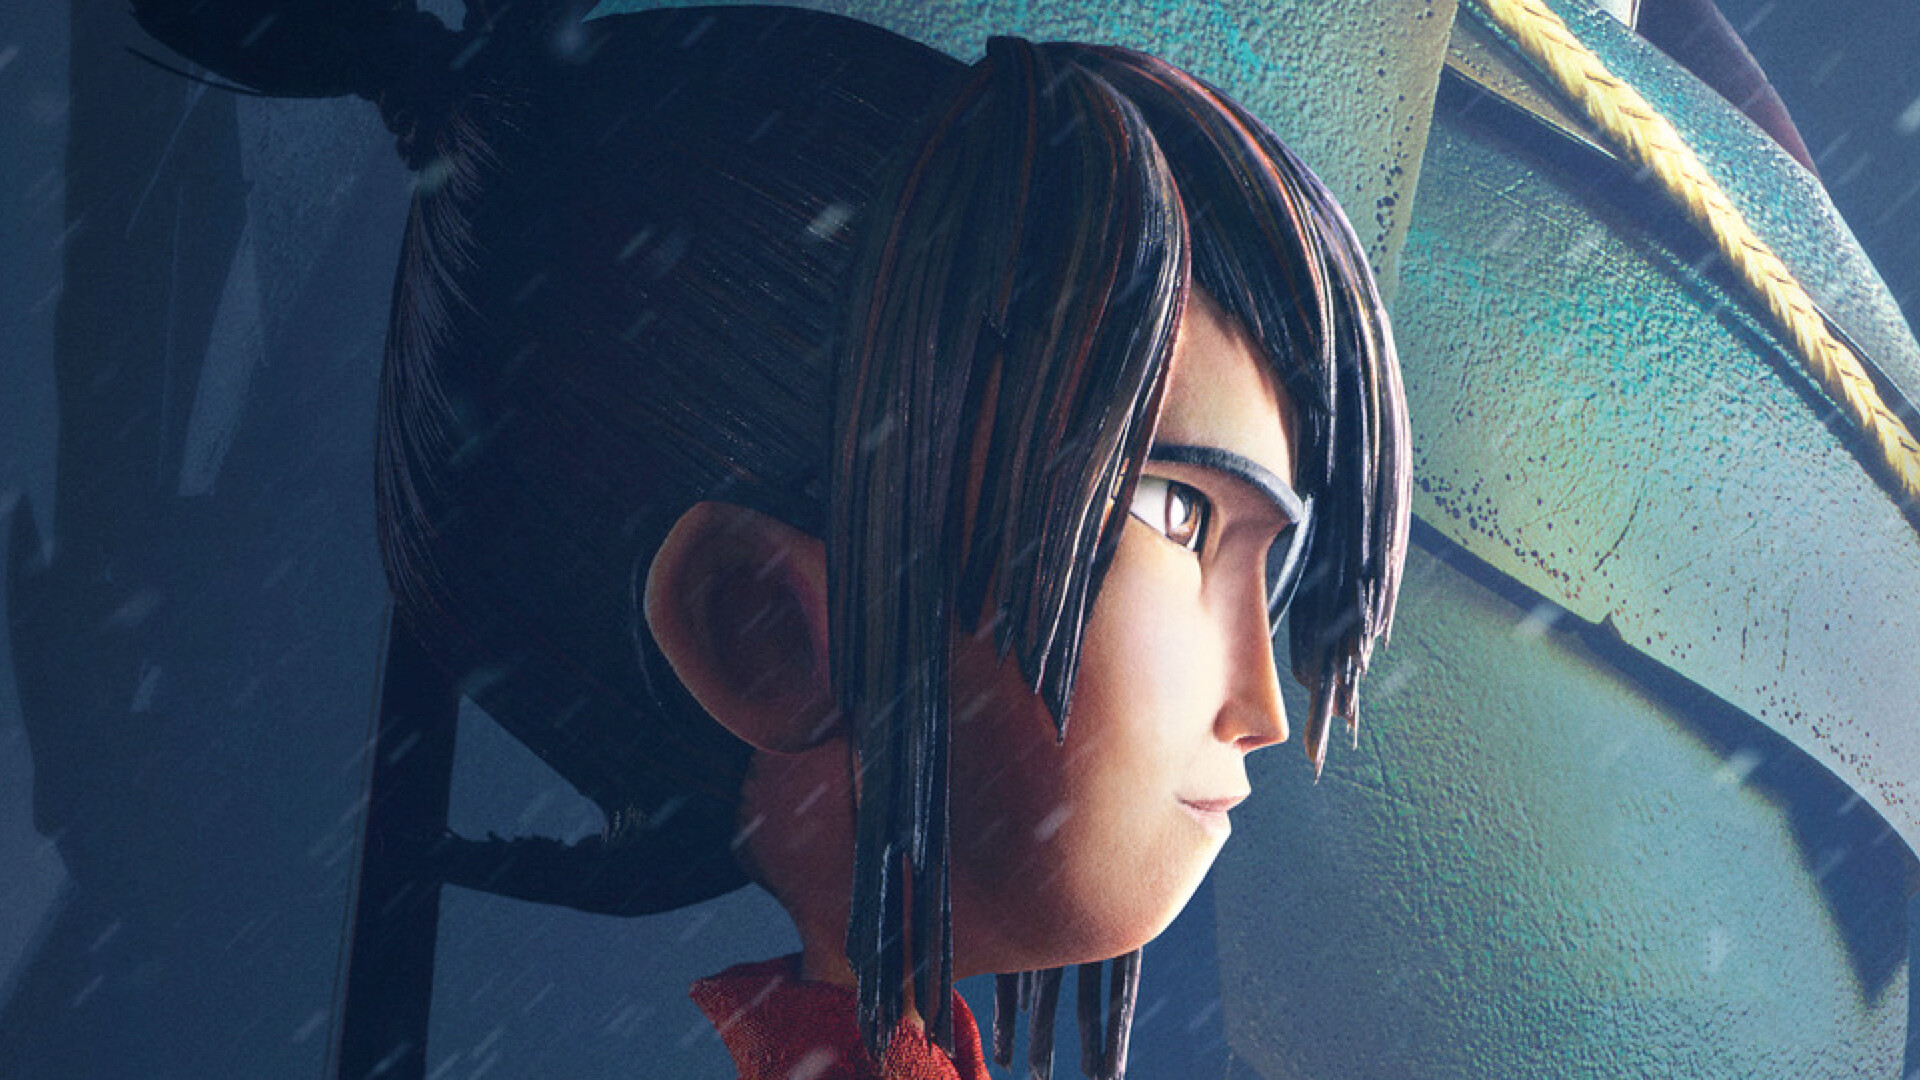 Kubo and the Two Strings: The winner of the BAFTA Award for Best Animated Film. 1920x1080 Full HD Wallpaper.